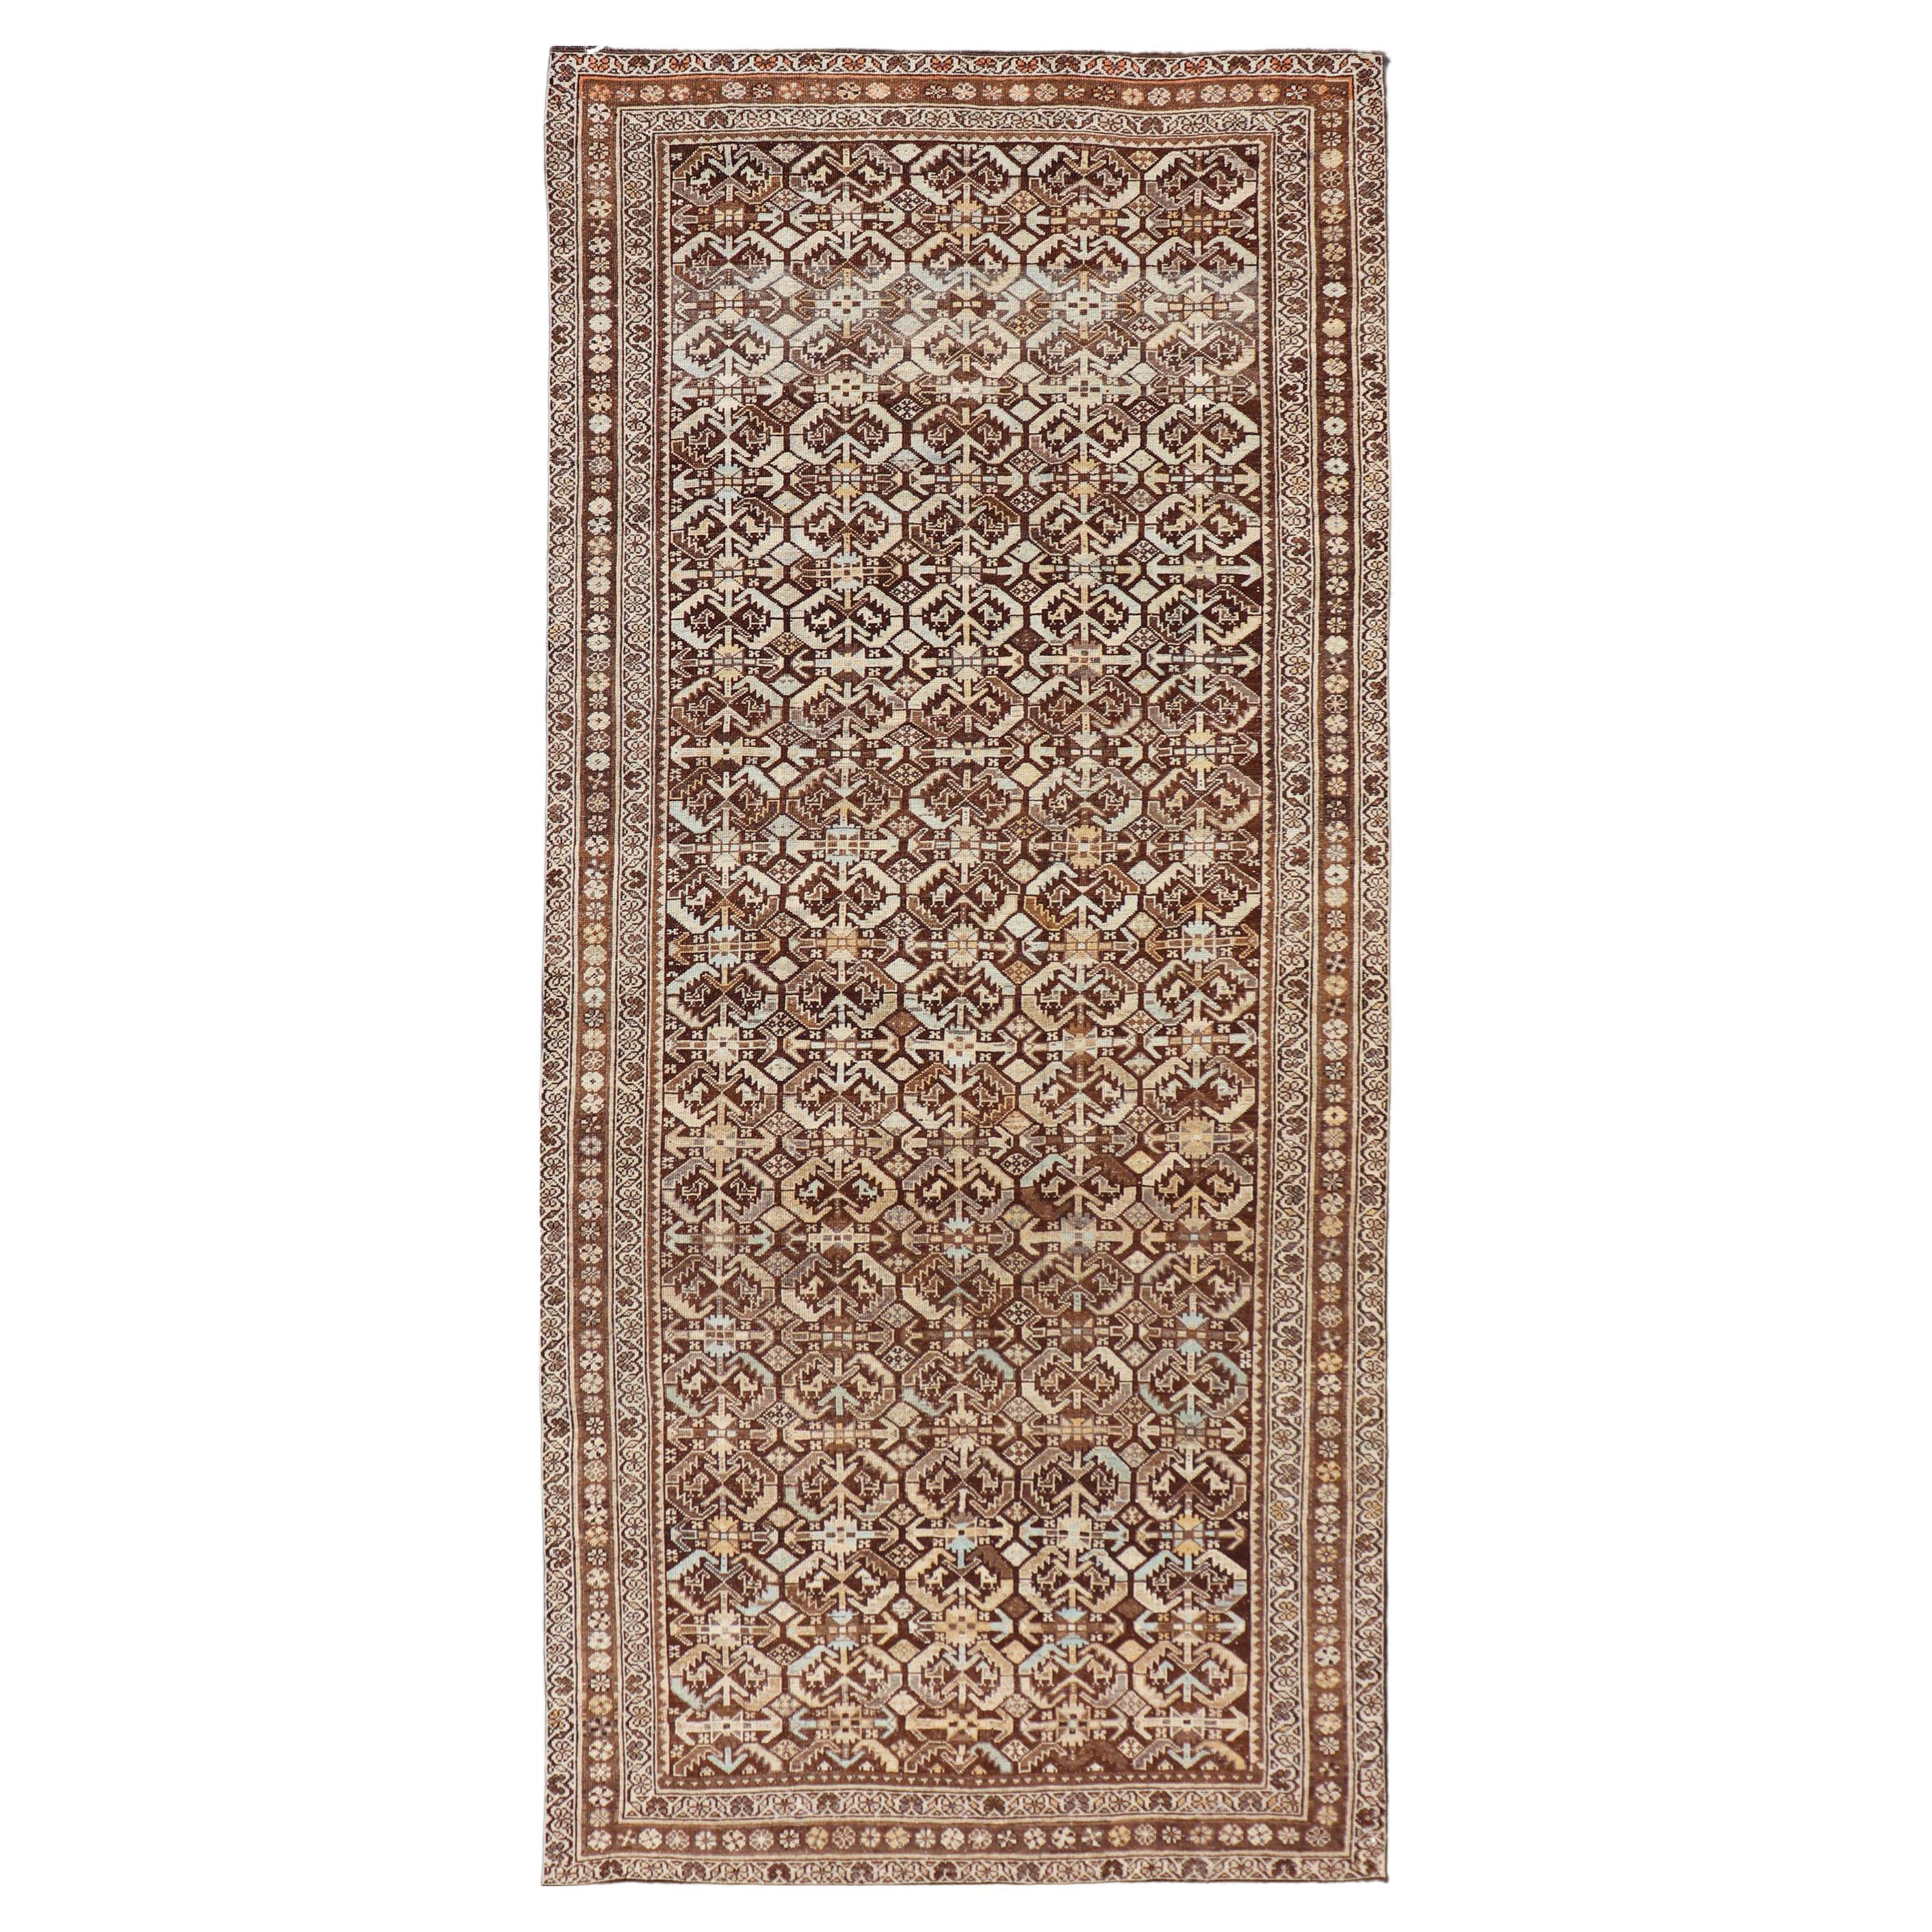 Kurdish Antique Gallery Runner with All-Over Tribal Design in Browns and Blue